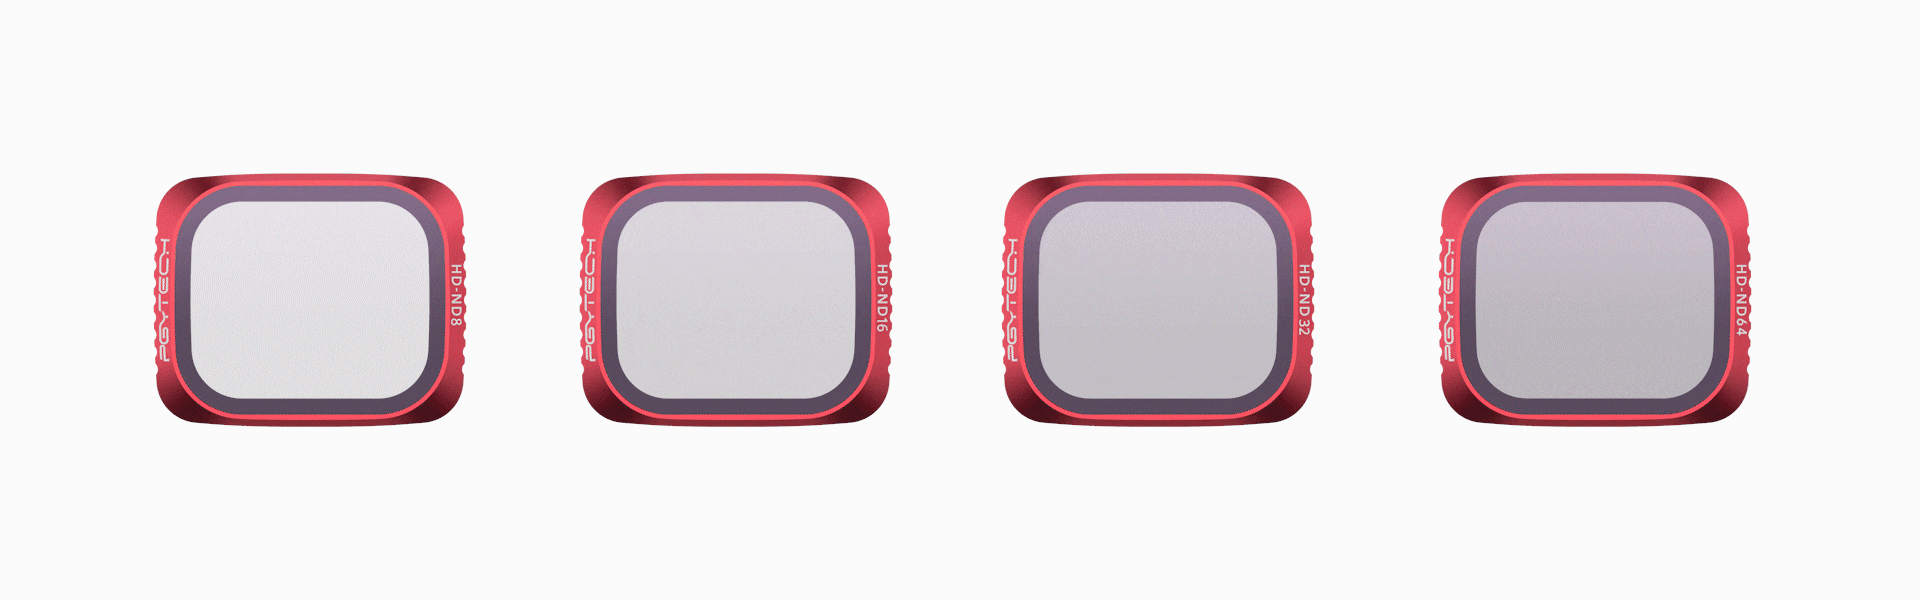 DJI AIR 2S VND FILTER - Available in 2-5 or 6-9 stops for accurate light control